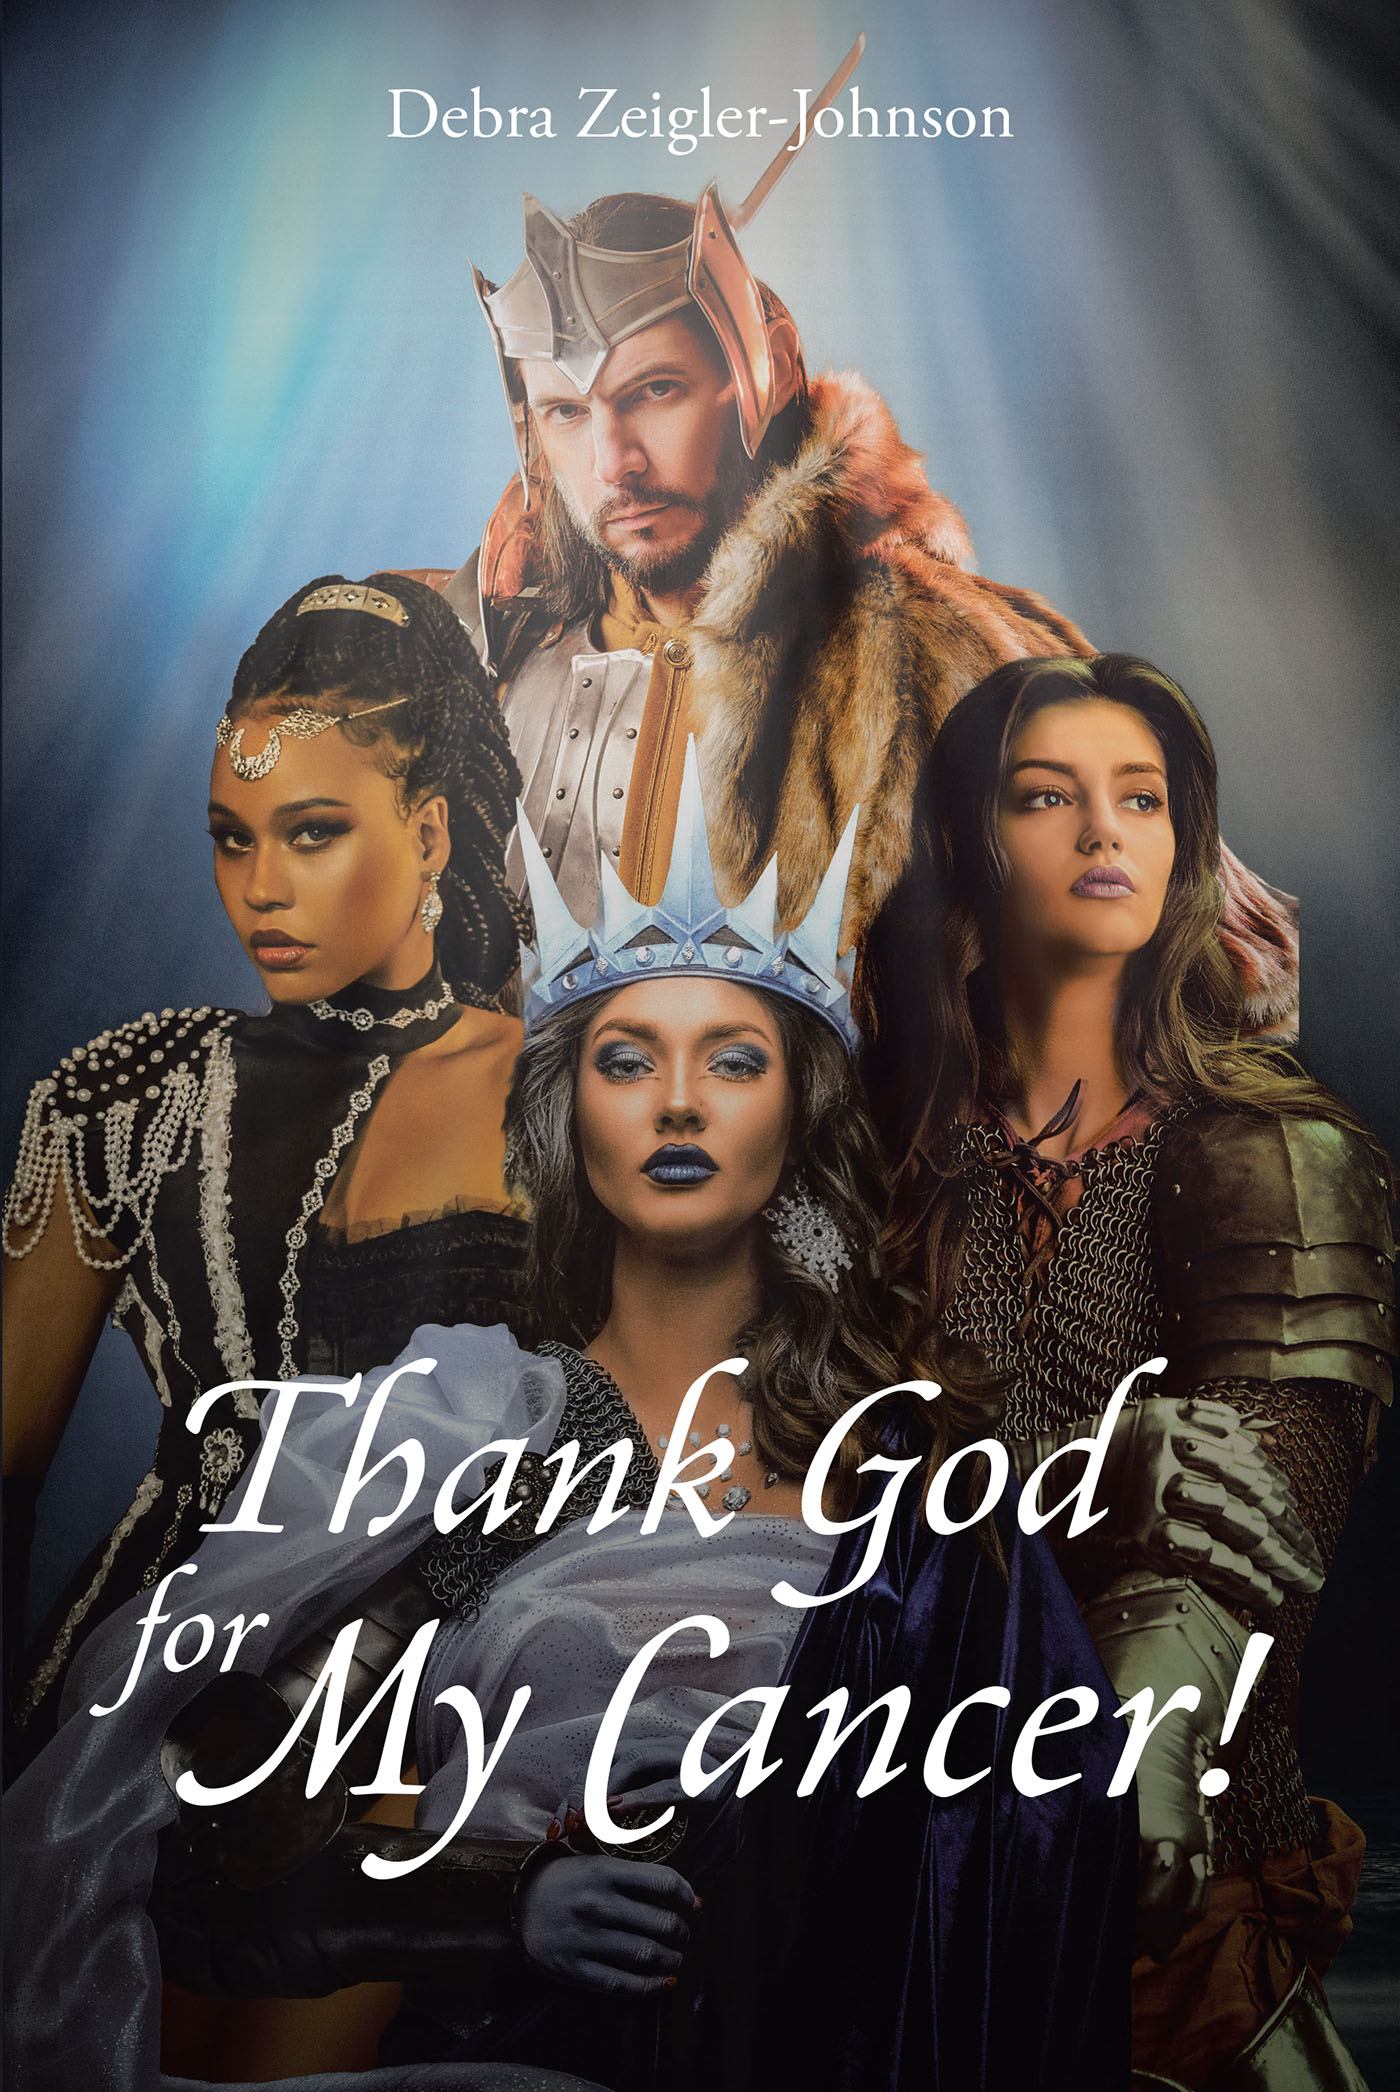 Debra Zeigler-Johnson’s Newly Released "Thank God for My Cancer!" is an Inspiring Message of Resilience, Gratitude, and Personal Transformation